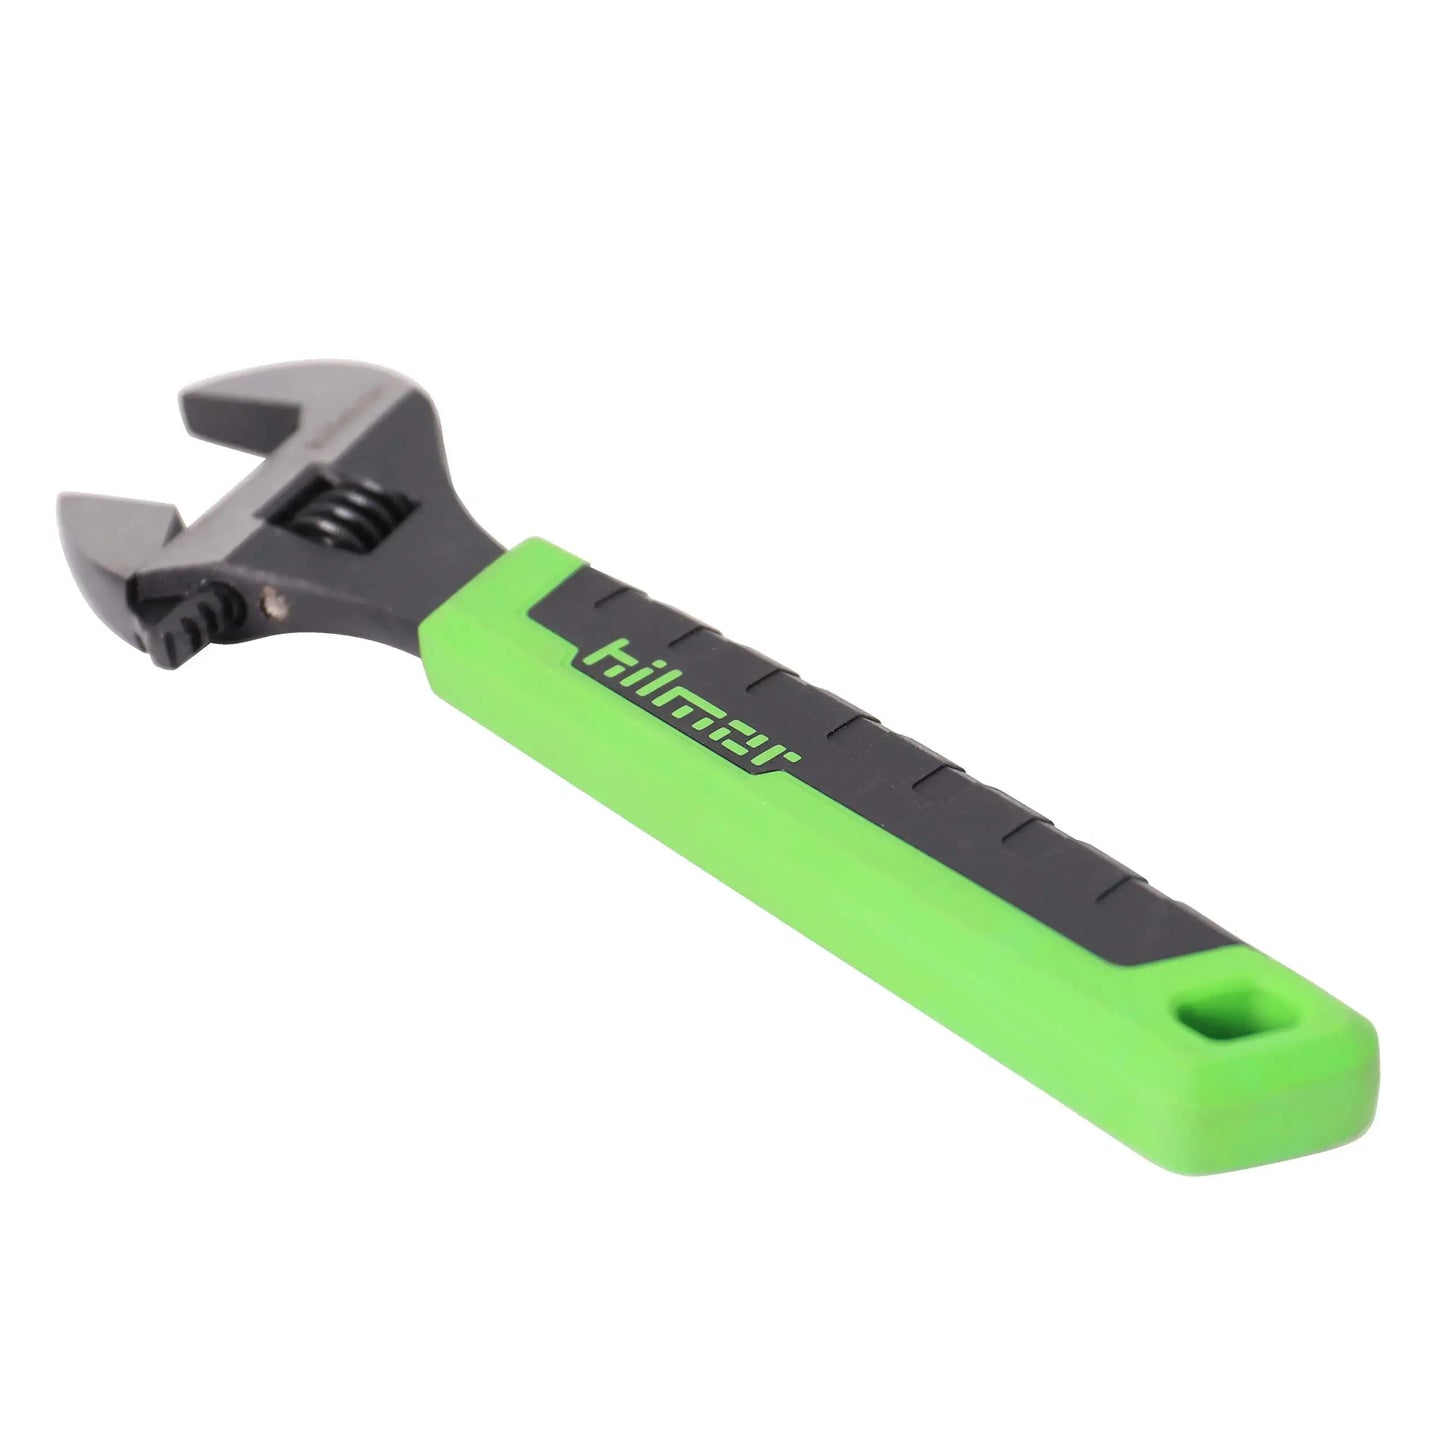 Hilmor 10 Adjustable Crescent Wrench with Rubber Handle Grip, Black & Green, AW10 1885421 Fourth